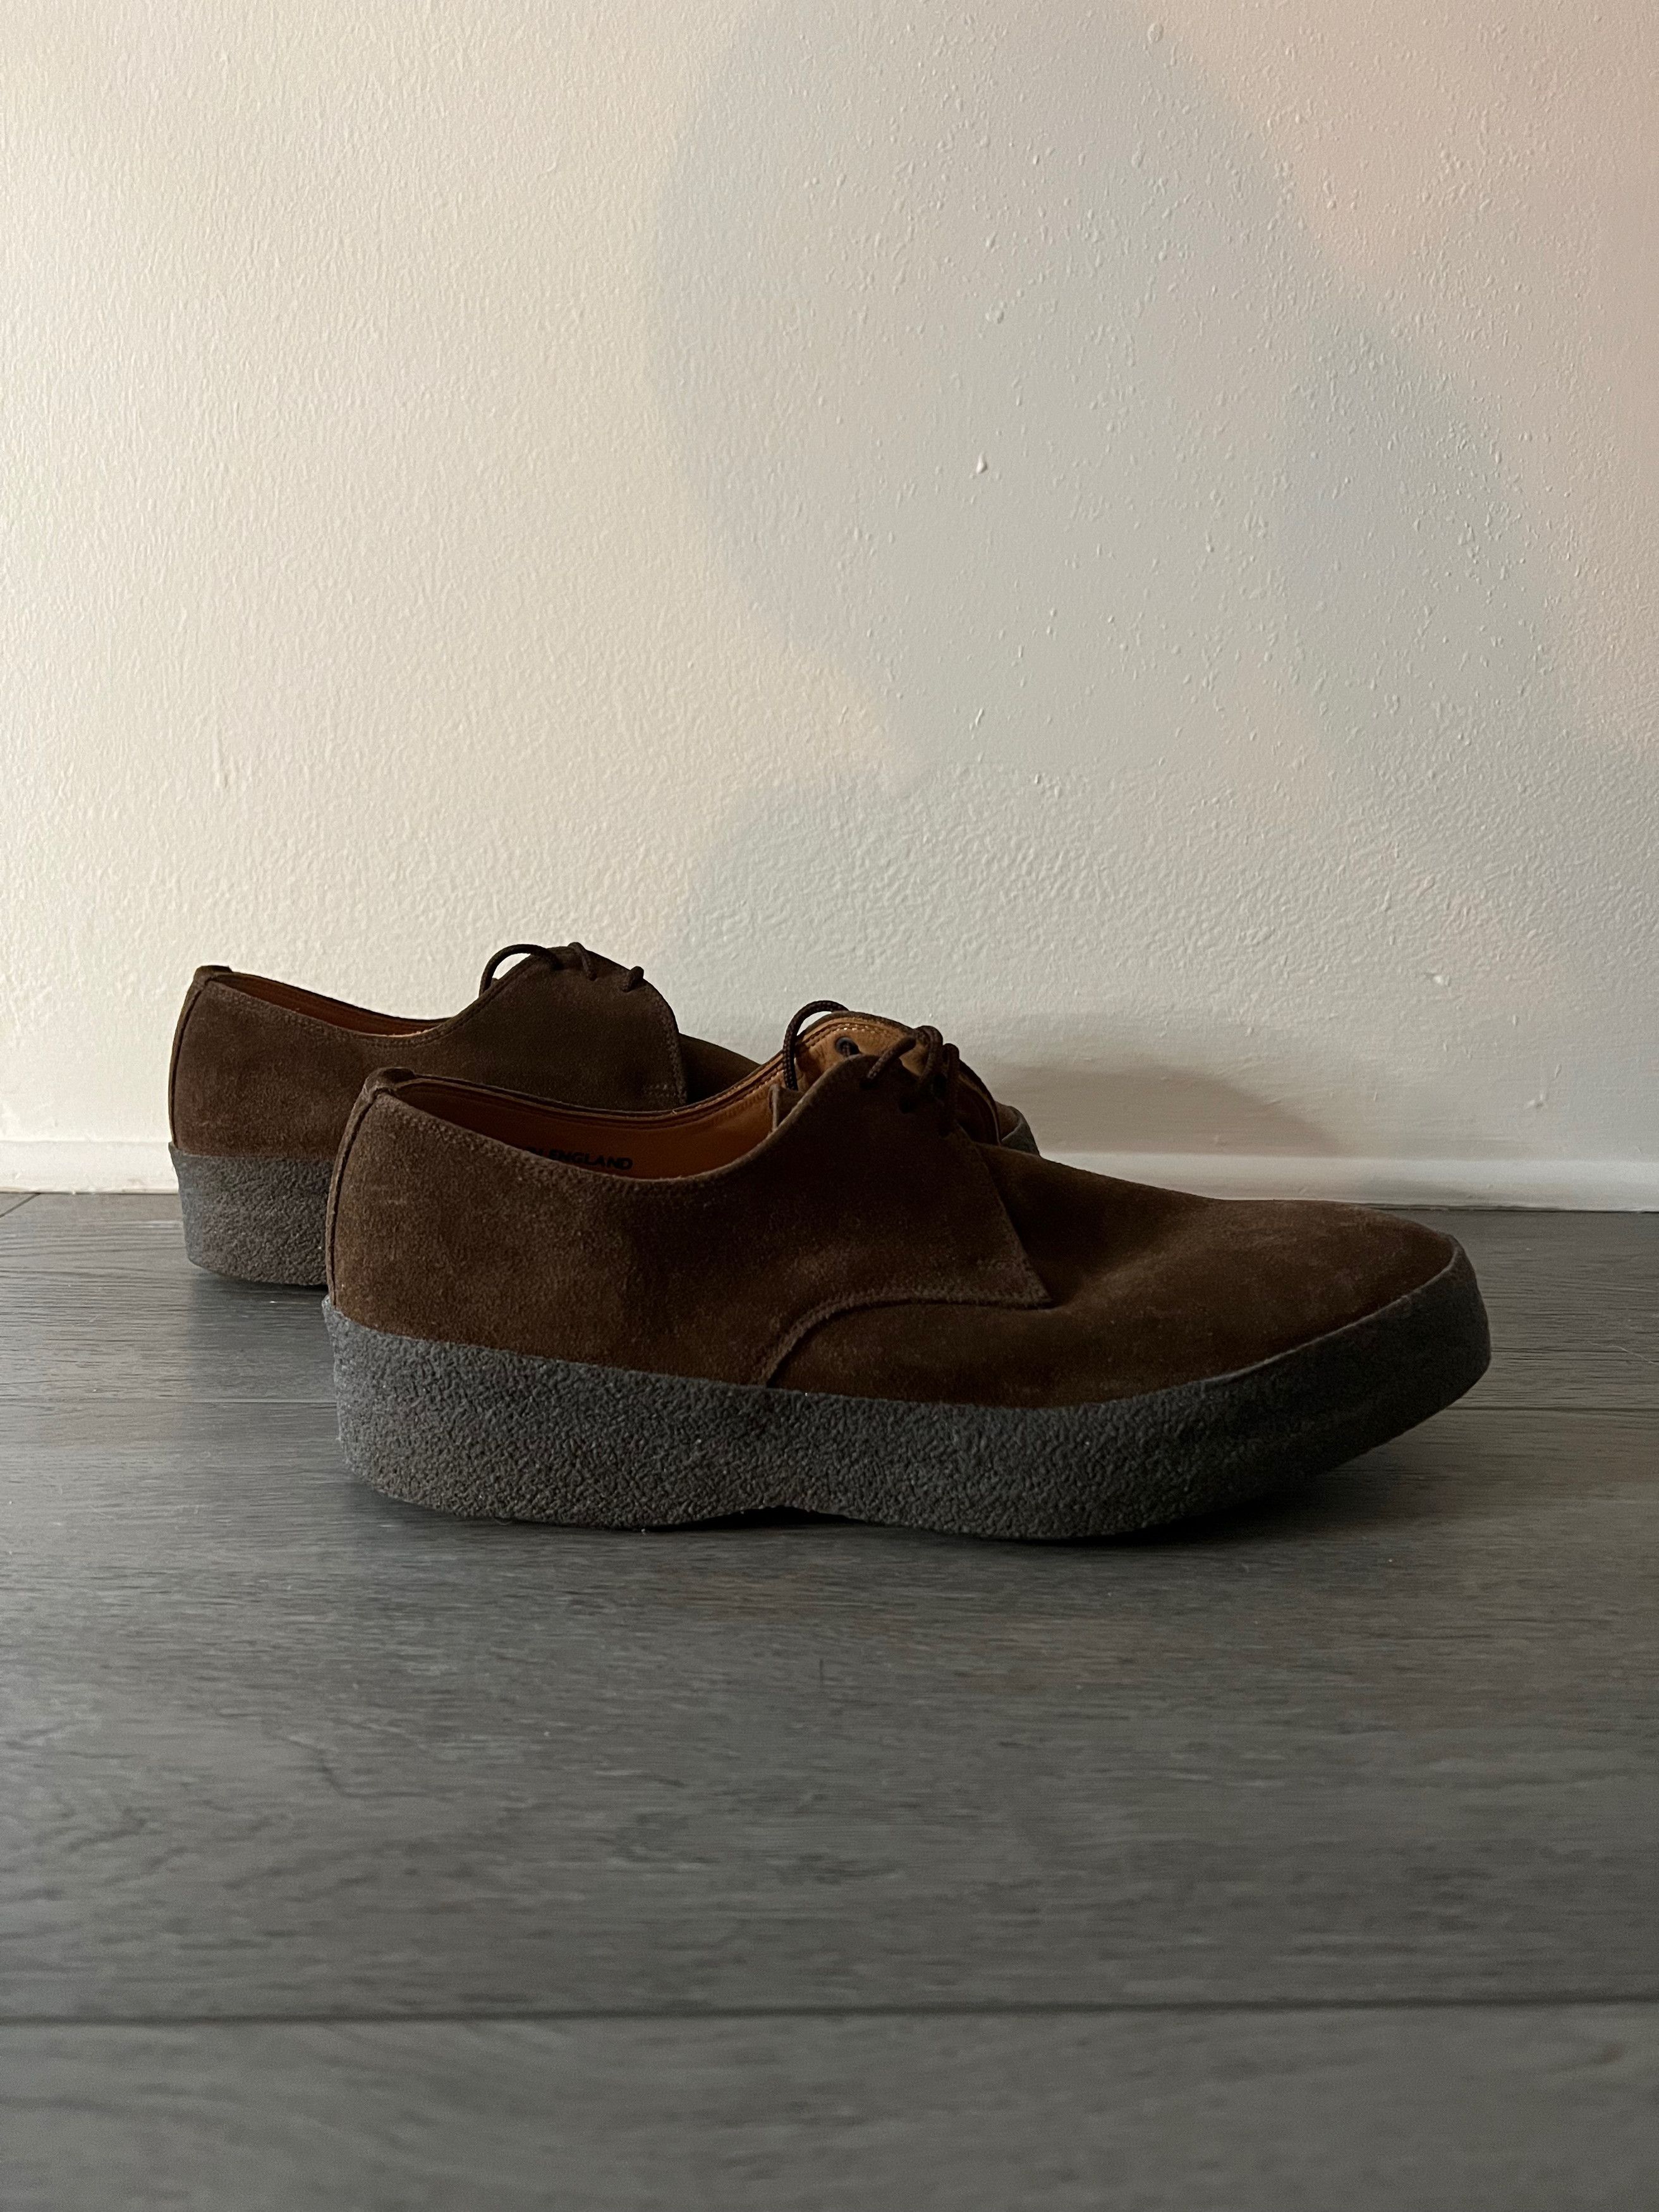 Sanders Low Top Chukka Boot Size US 10 / EU 43 - 1 Preview